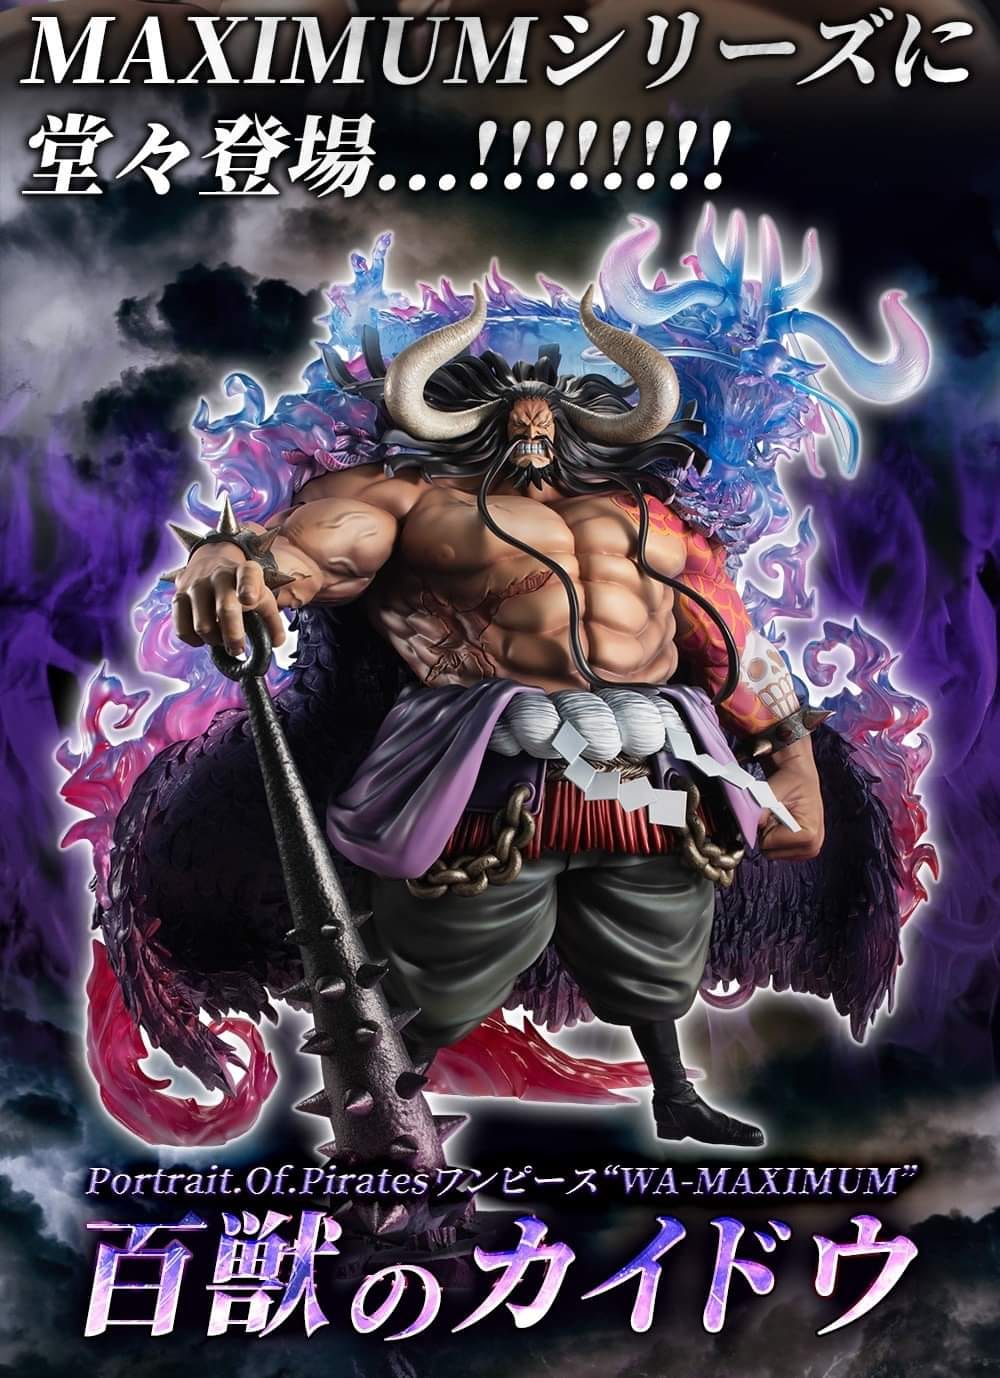 PREORDER Portrait.Of.Pirates ONE PIECE “WA-MAXIMUM”  Kaido the Beast (Super limited reprint)